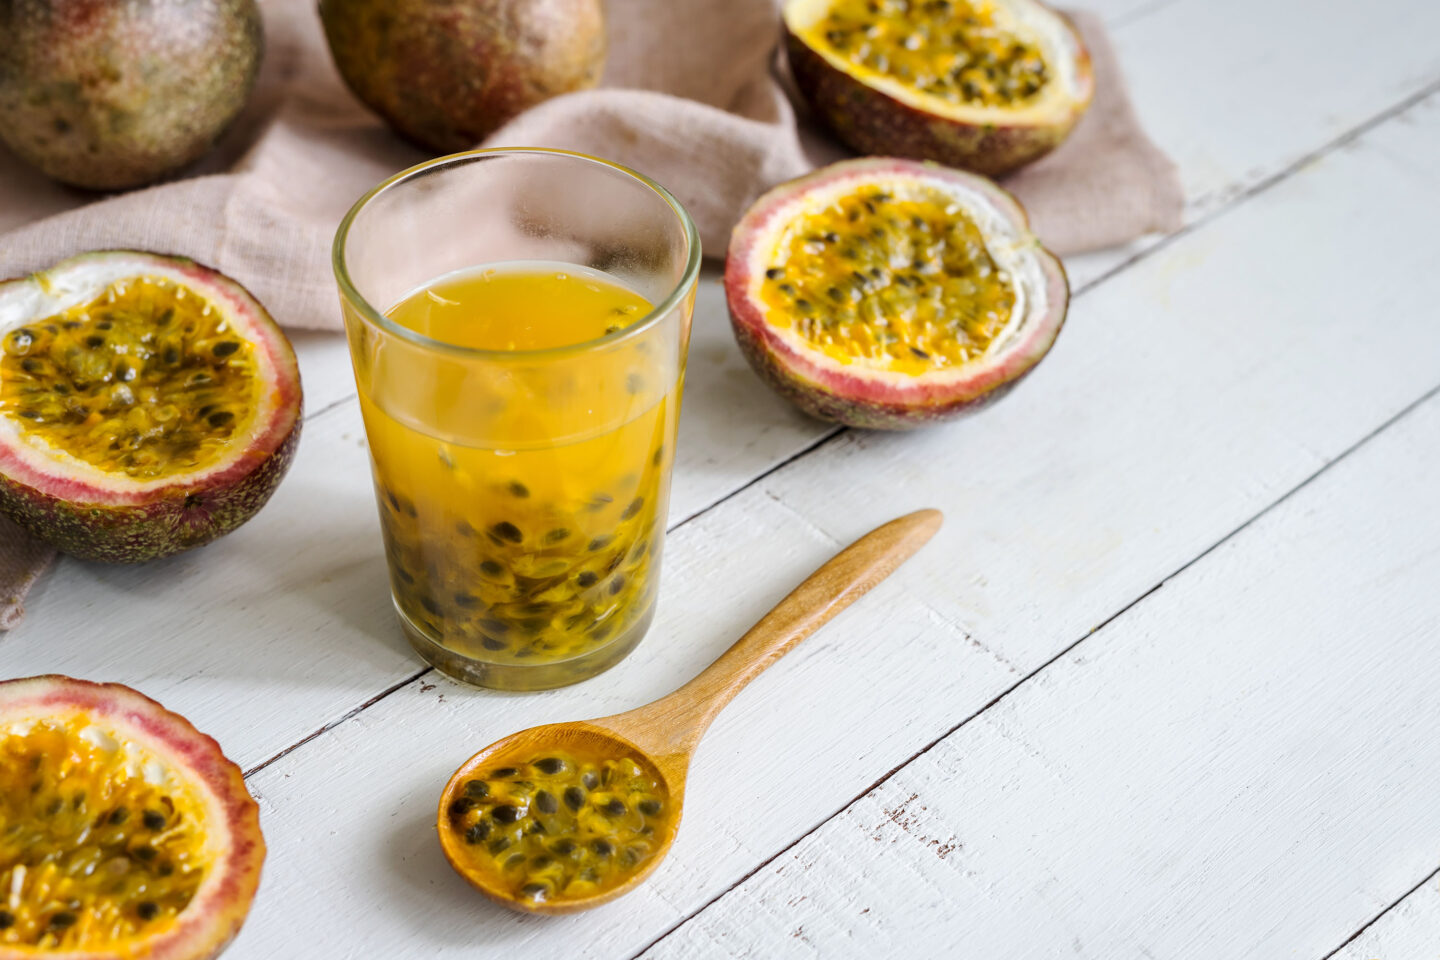 passion fruit juice and fruits